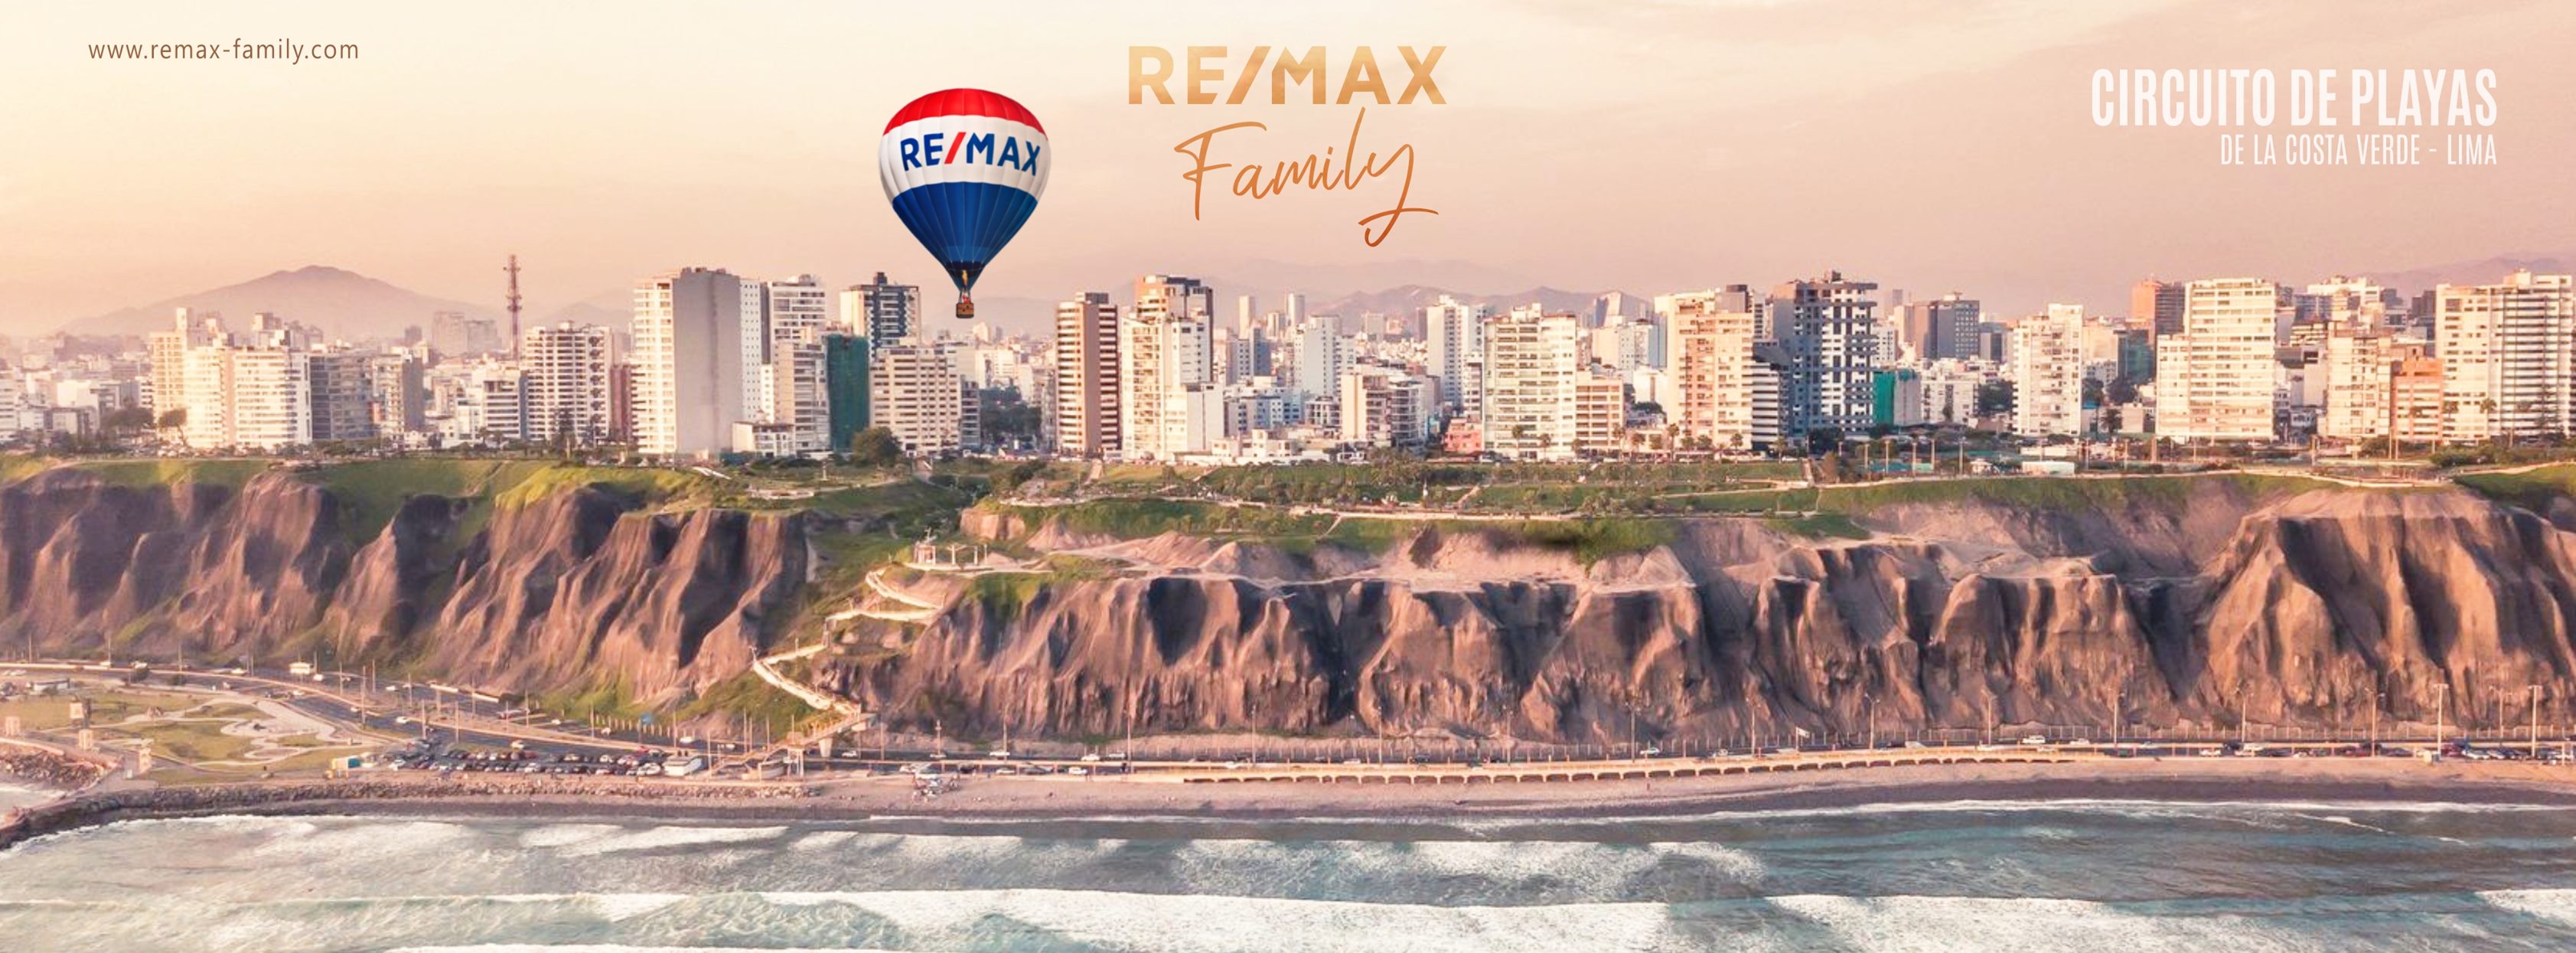 Remax FAMILY